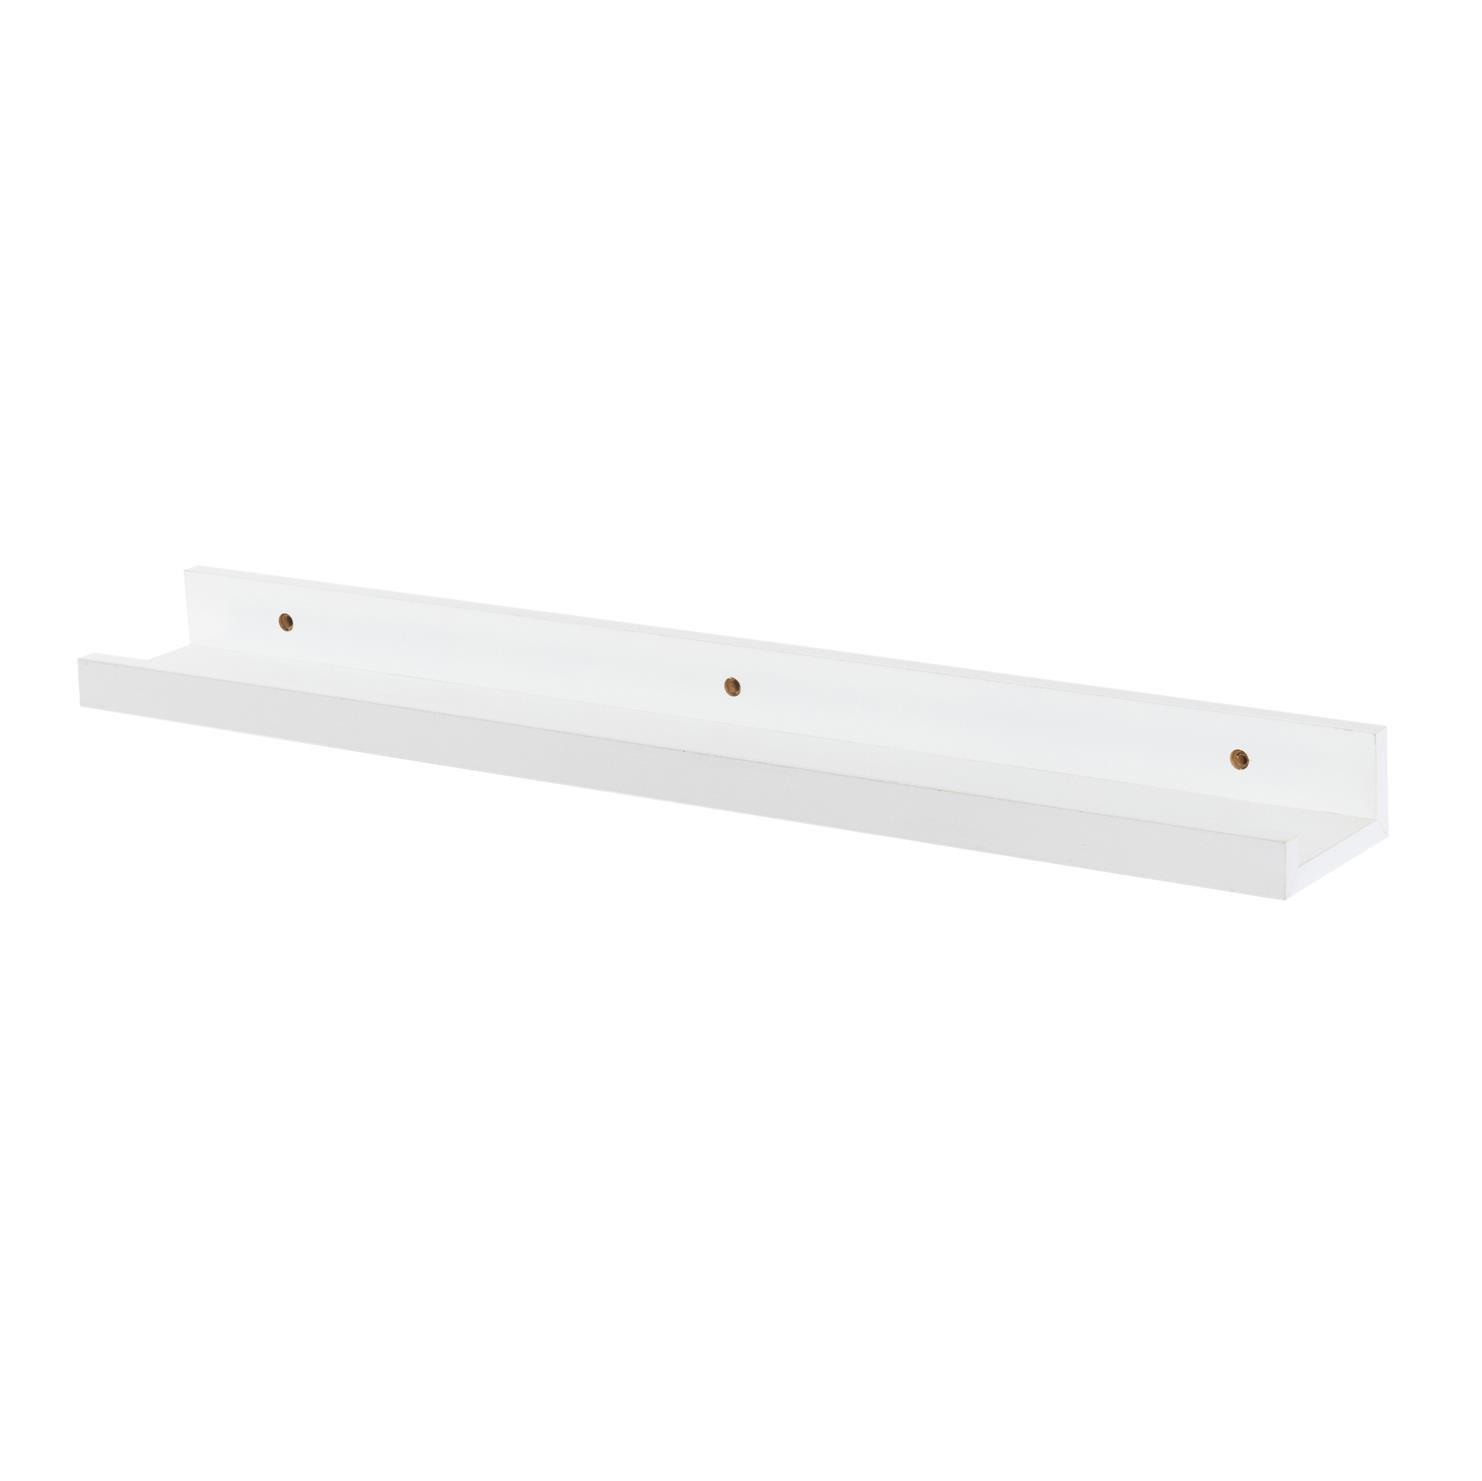 57cm Floating Picture Ledge Wall Shelf | By Harbour Housewares